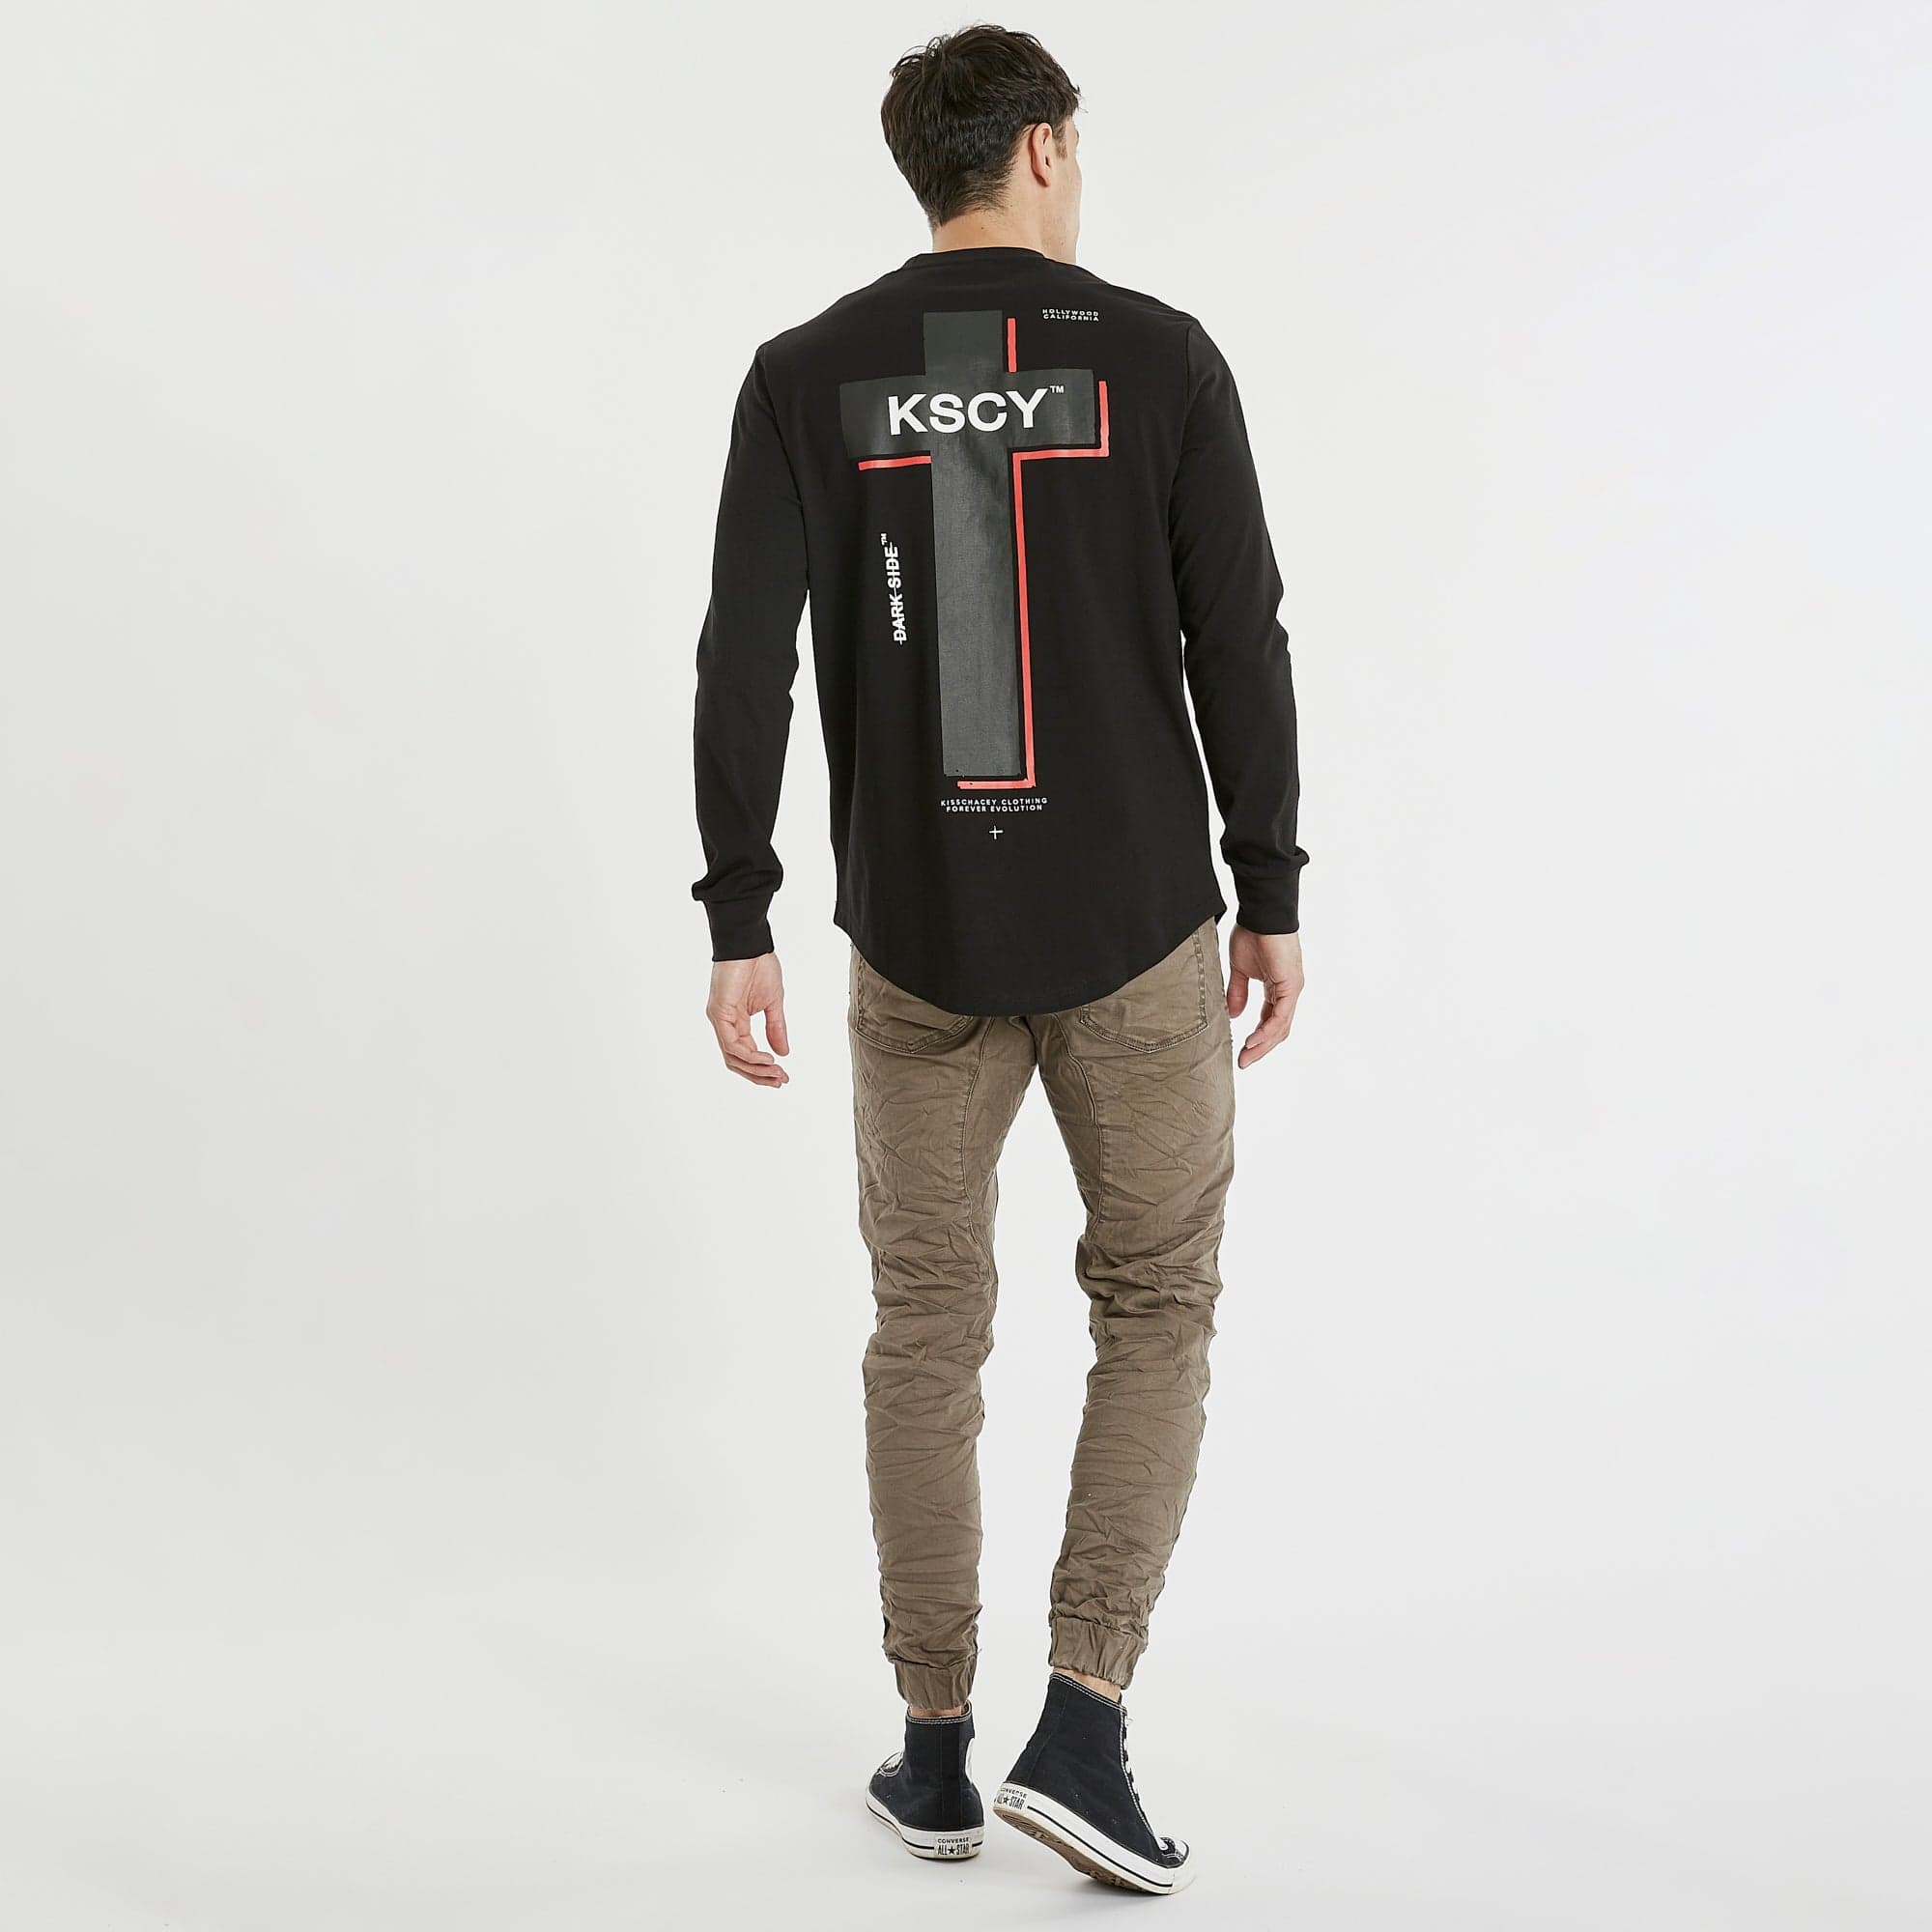 Lively Dual Curved Long Sleeve T-Shirt Jet Black